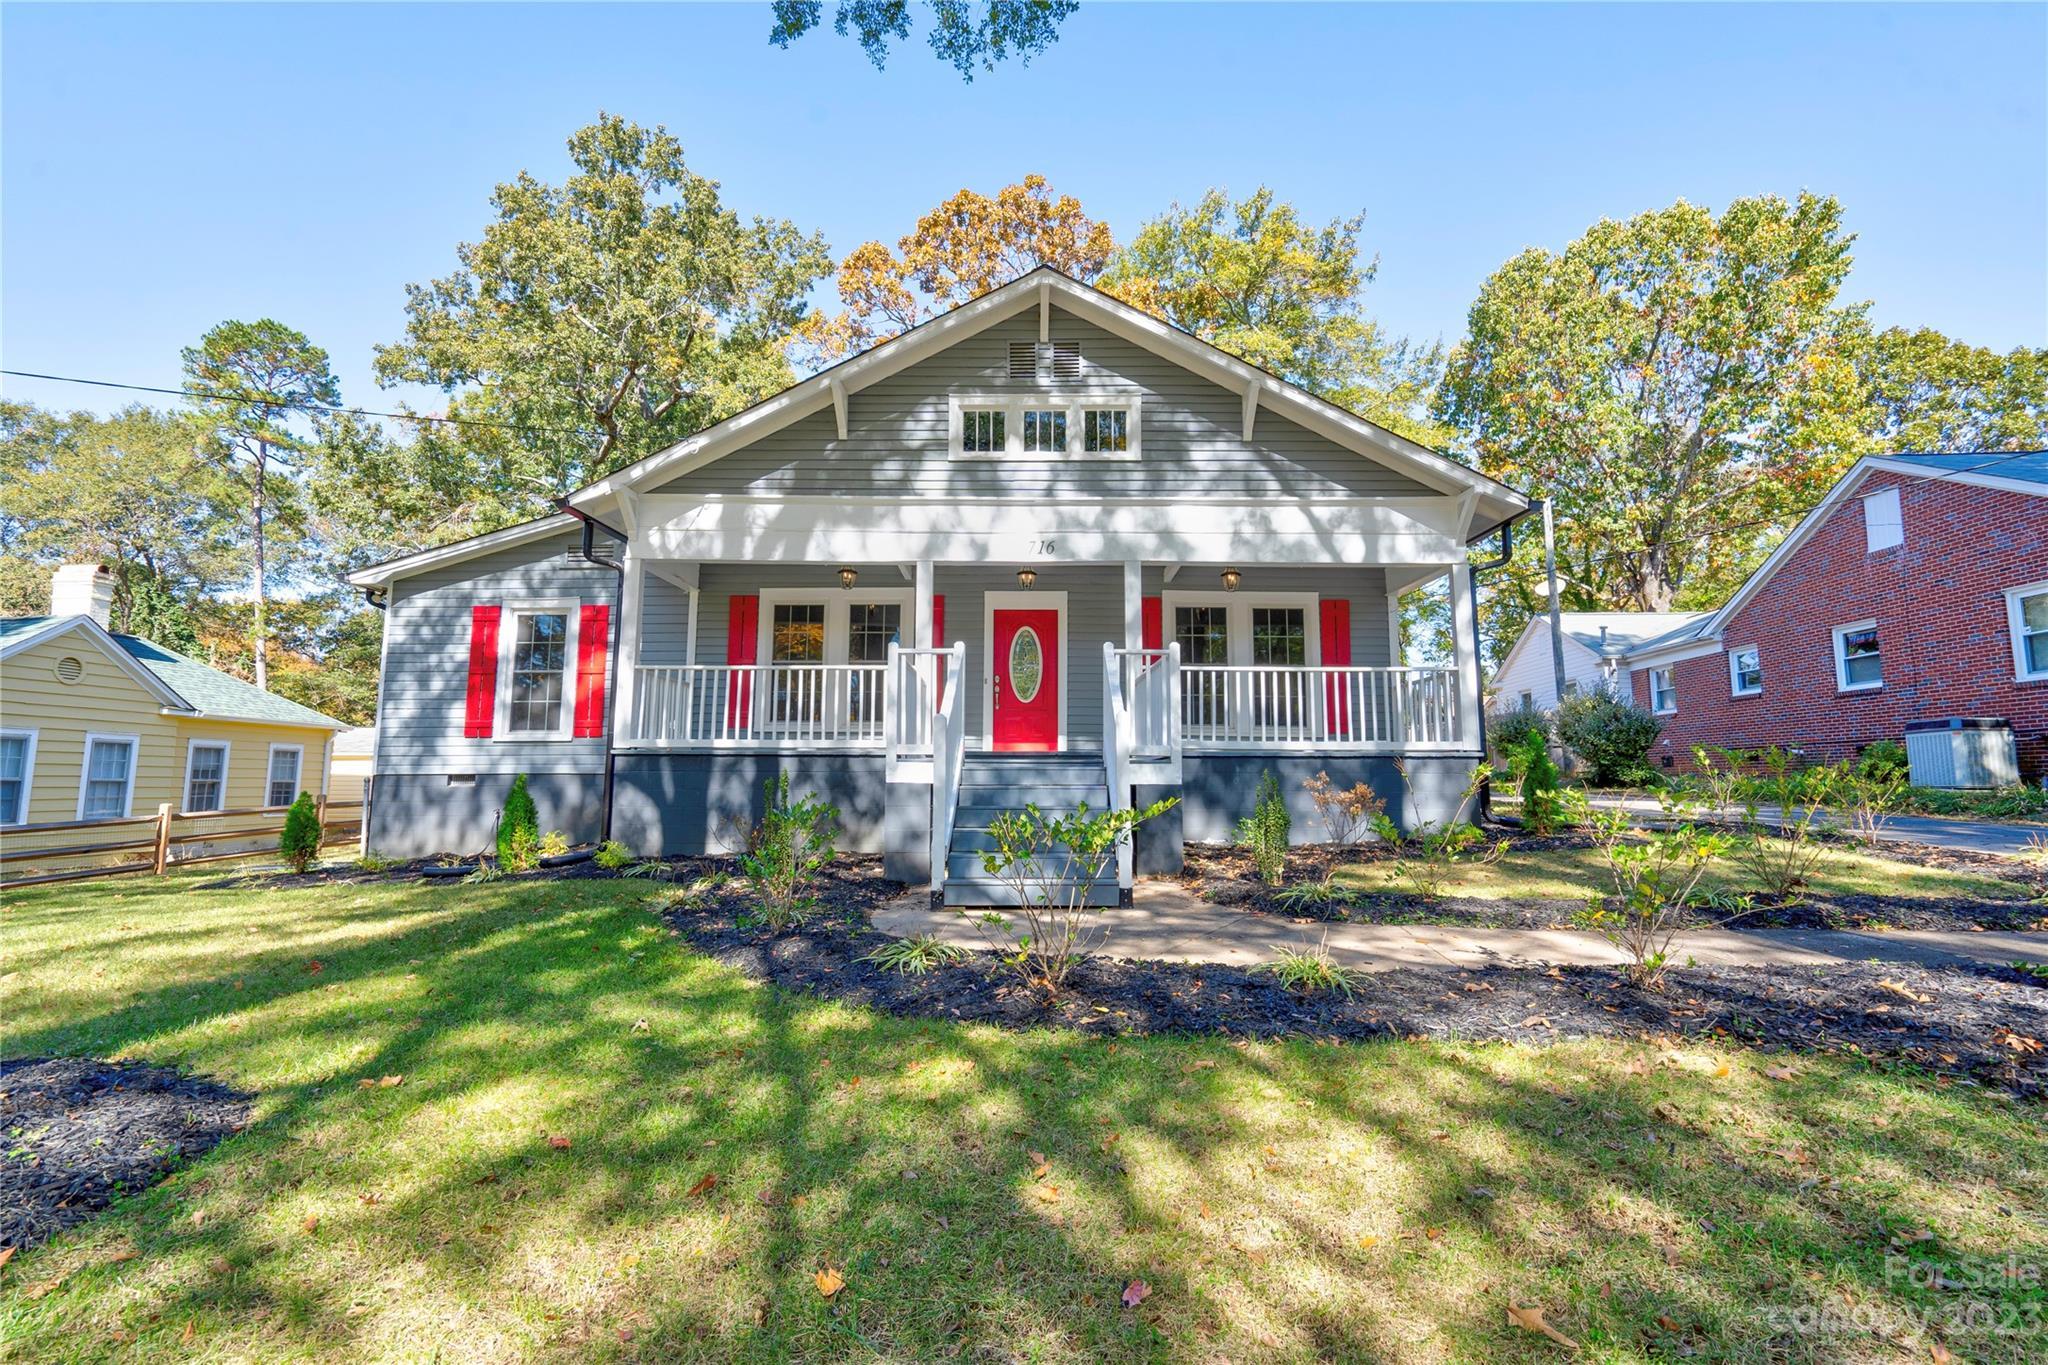 Photo one of 716 W Graham St Shelby NC 28150 | MLS 4079342